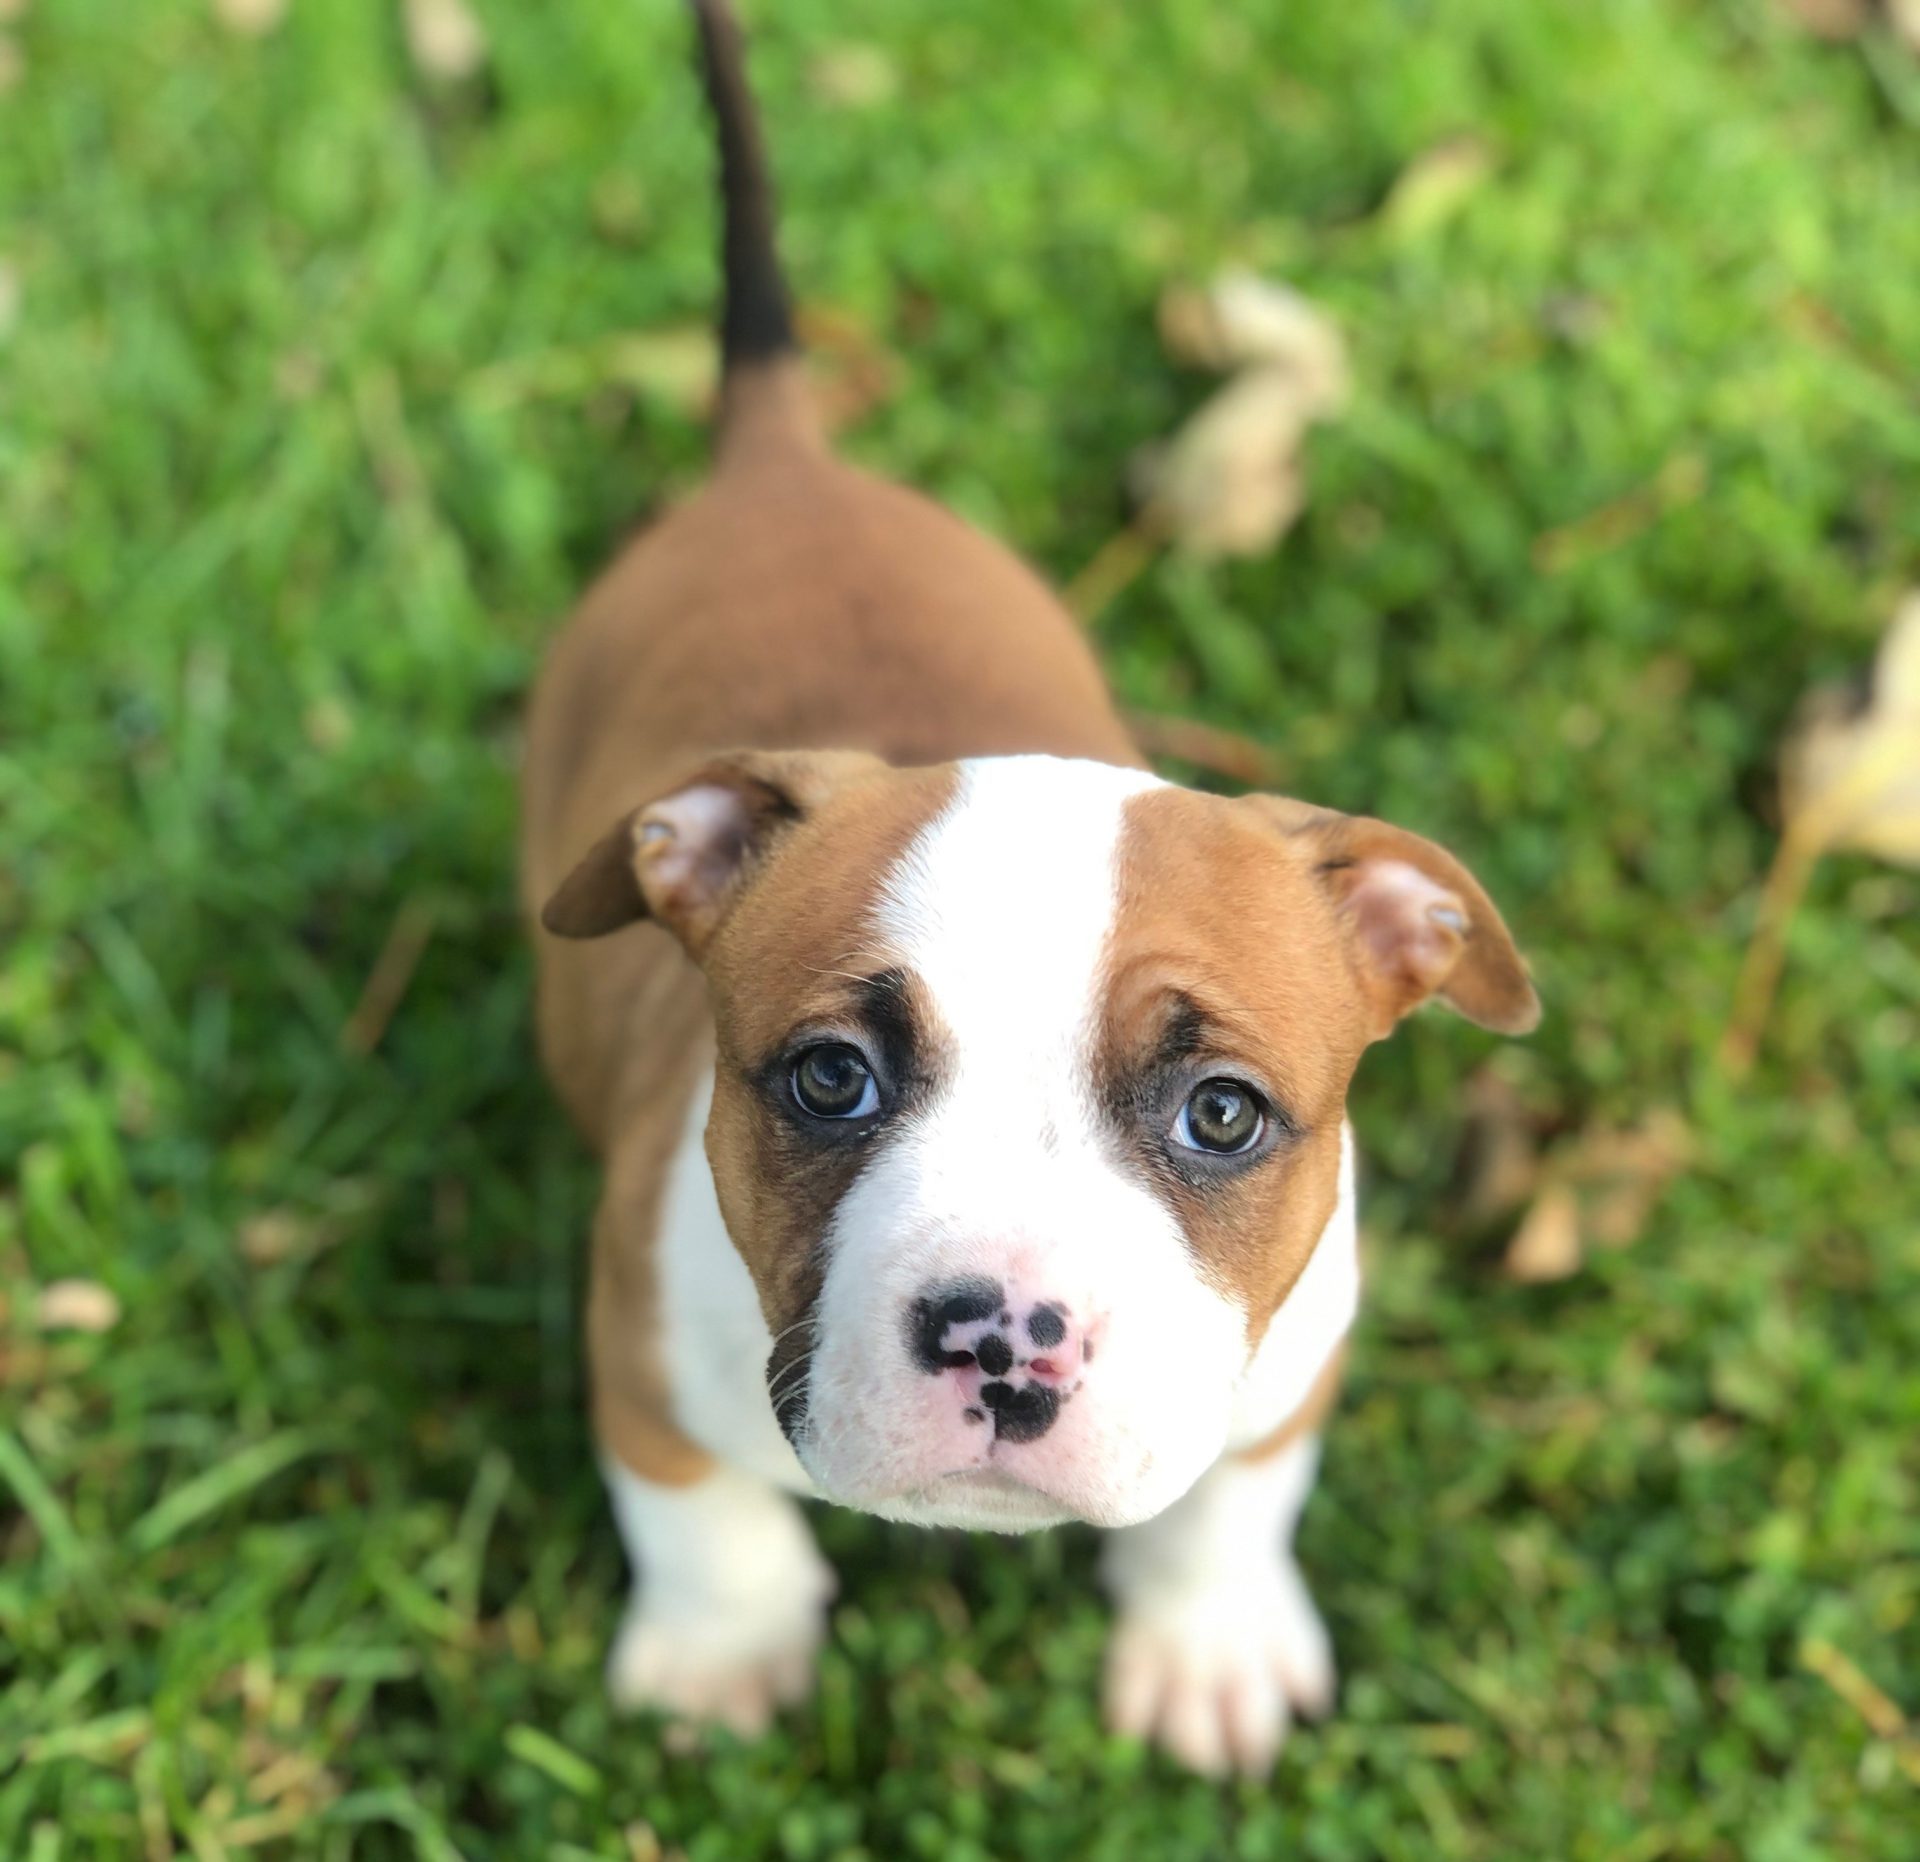 XL Bully Puppy for sale ABKC registered stunning quality pup